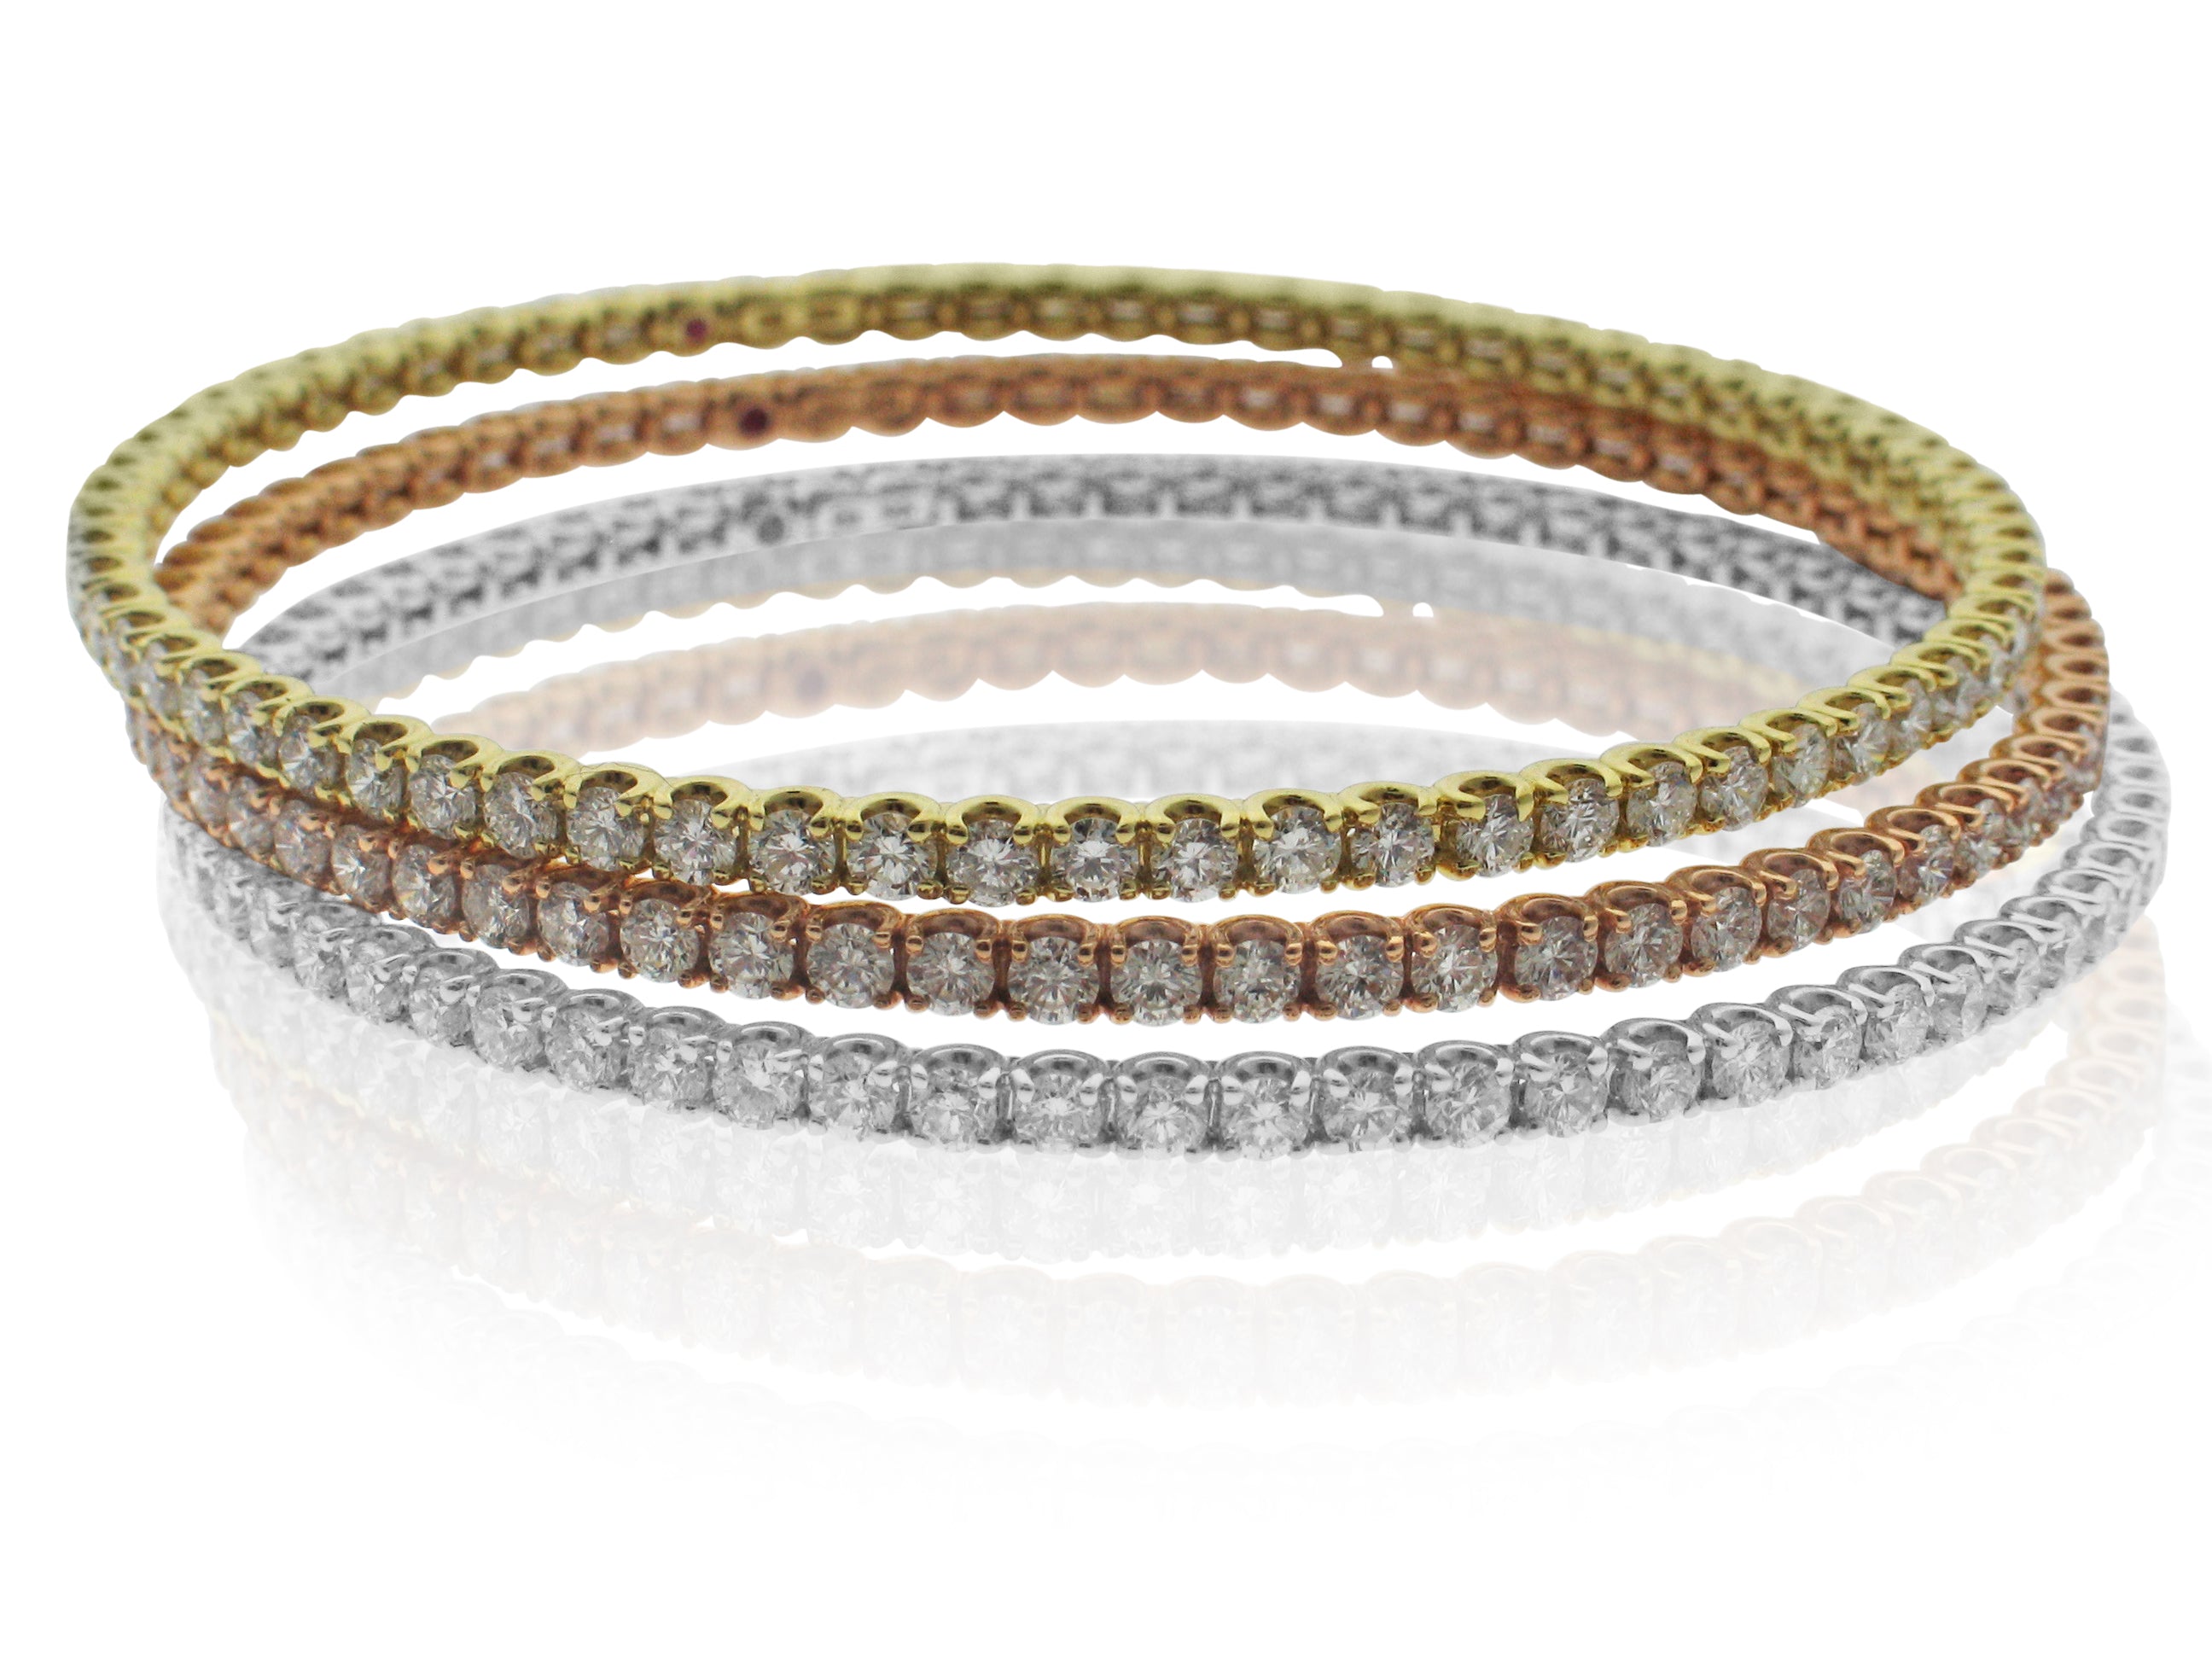 ROBERTO COIN 18K YELLOW GOLD 5.50CT DIAMOND BANGLE BRACELET (ALL OTHERS SOLD SEPARATELY) FROM THE DIAMOND COLLECTION